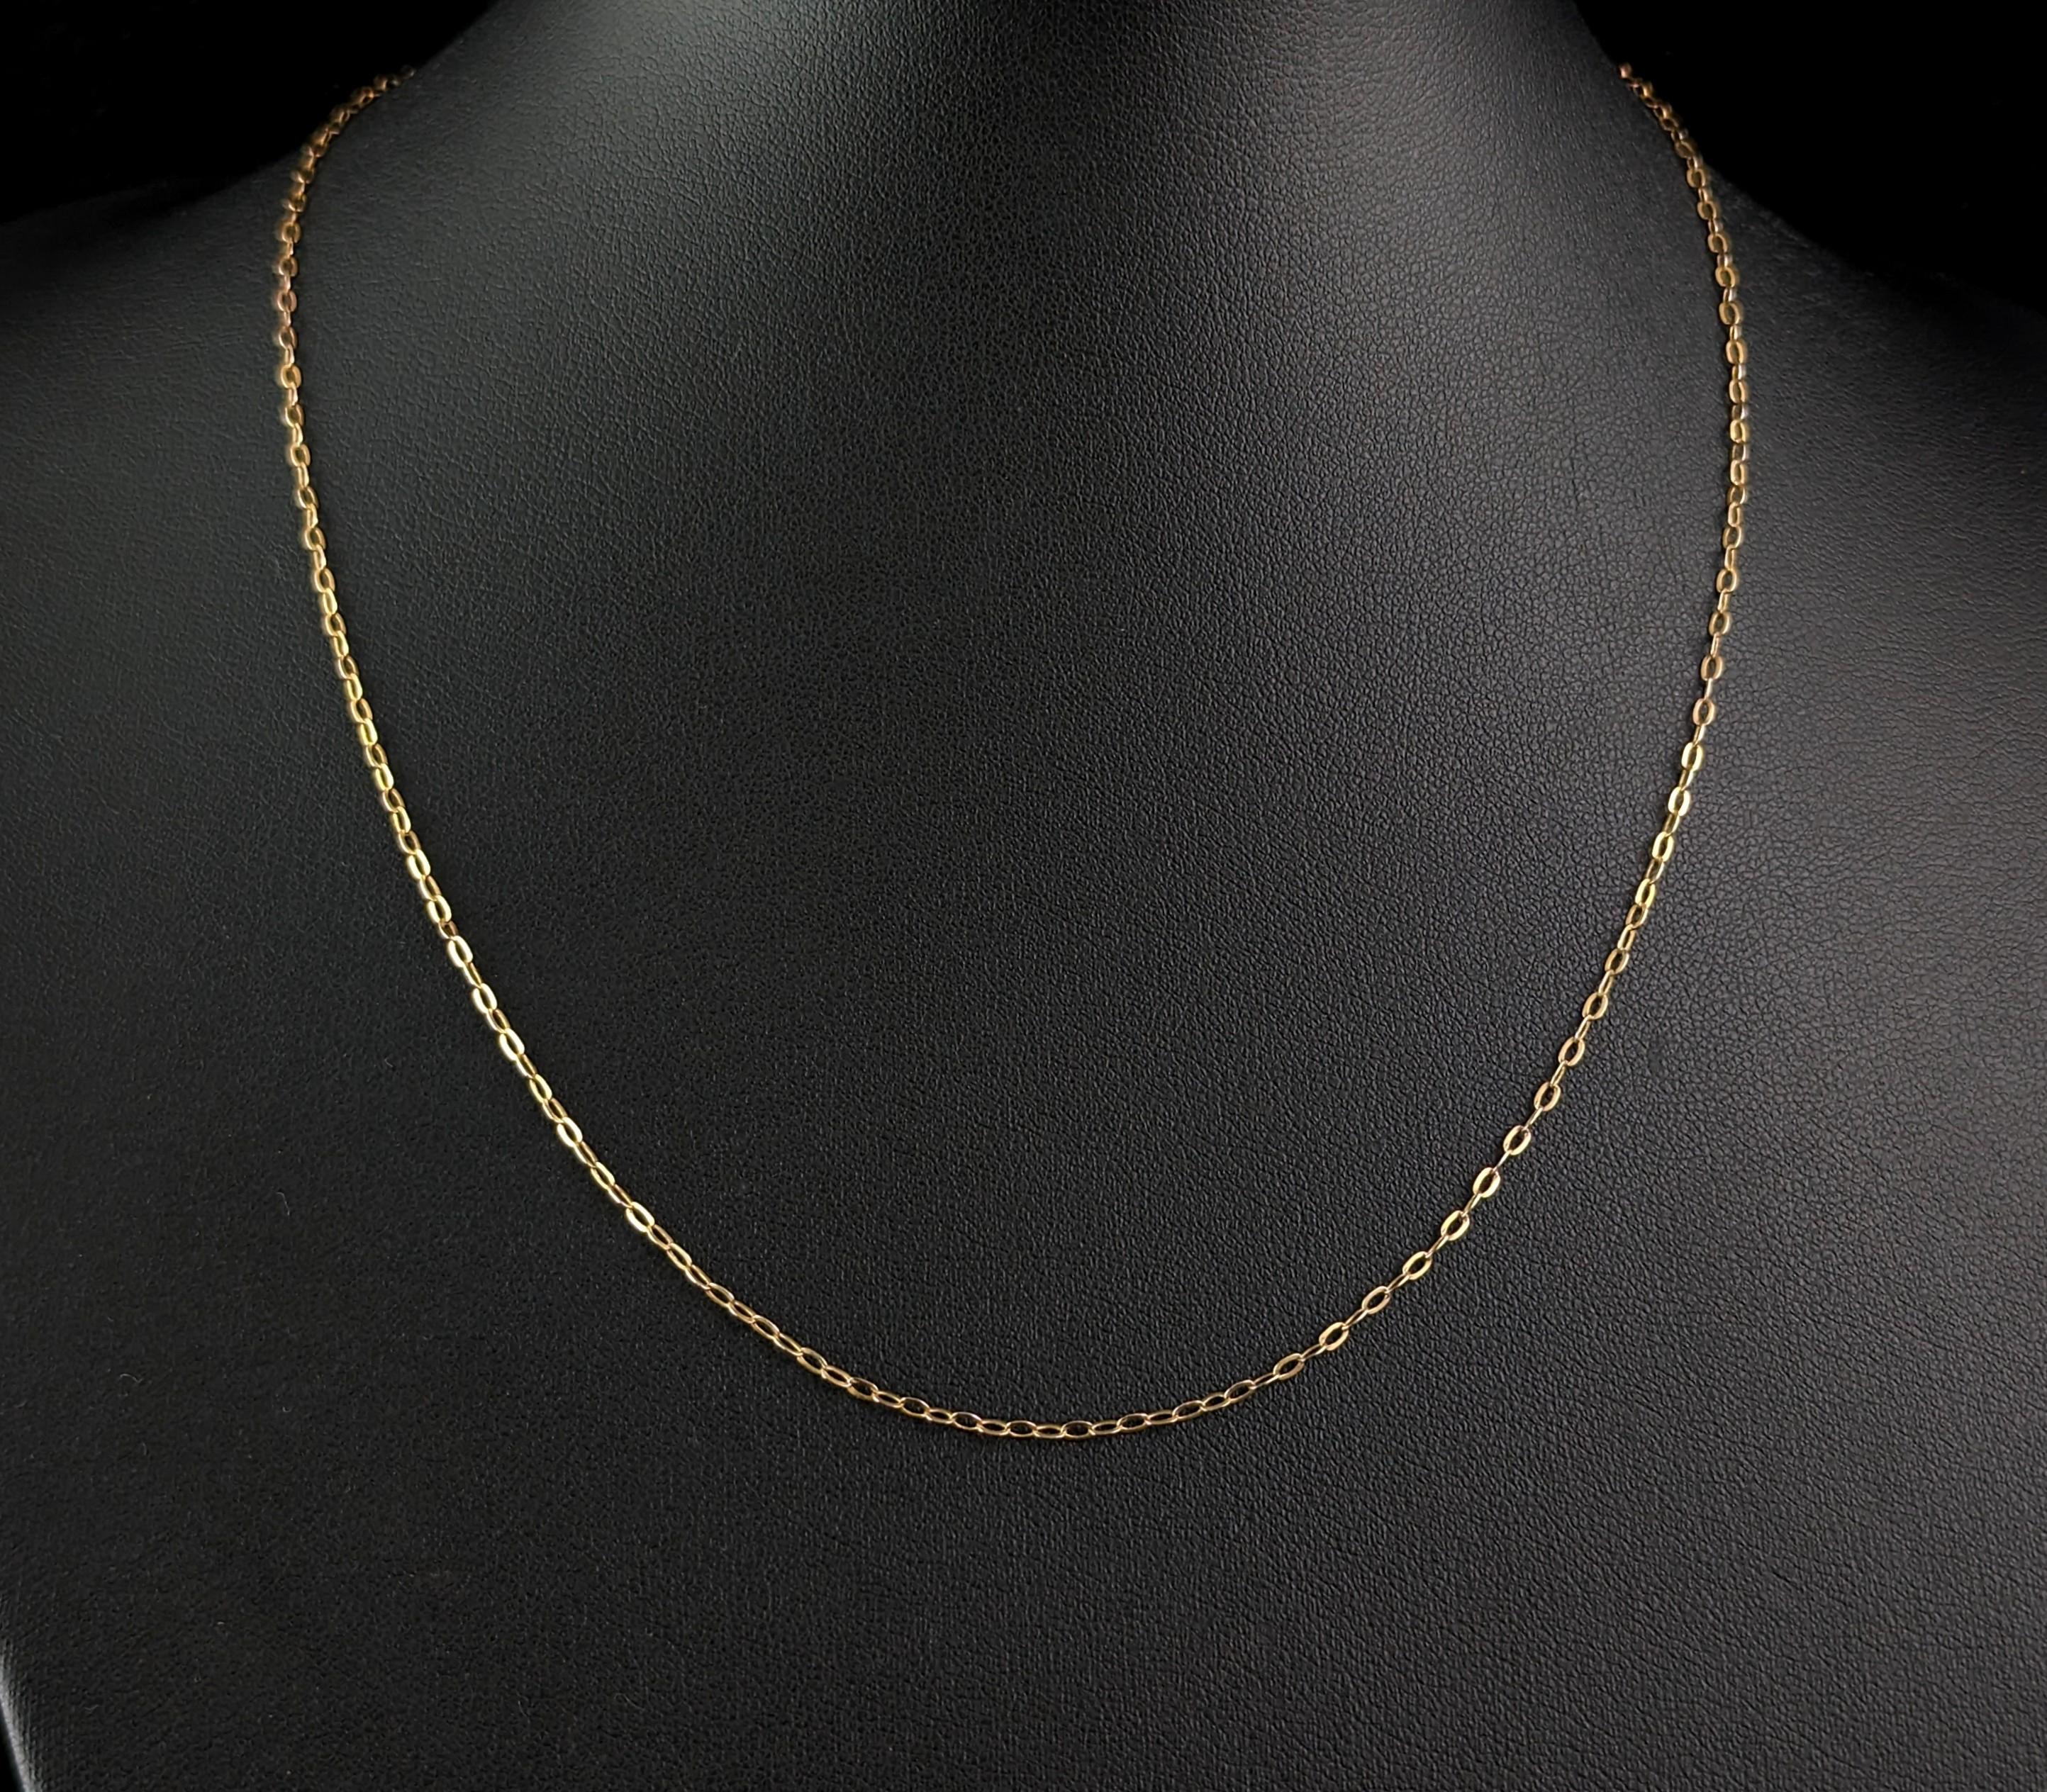 Antique 9k yellow gold trace chain necklace, dainty  1